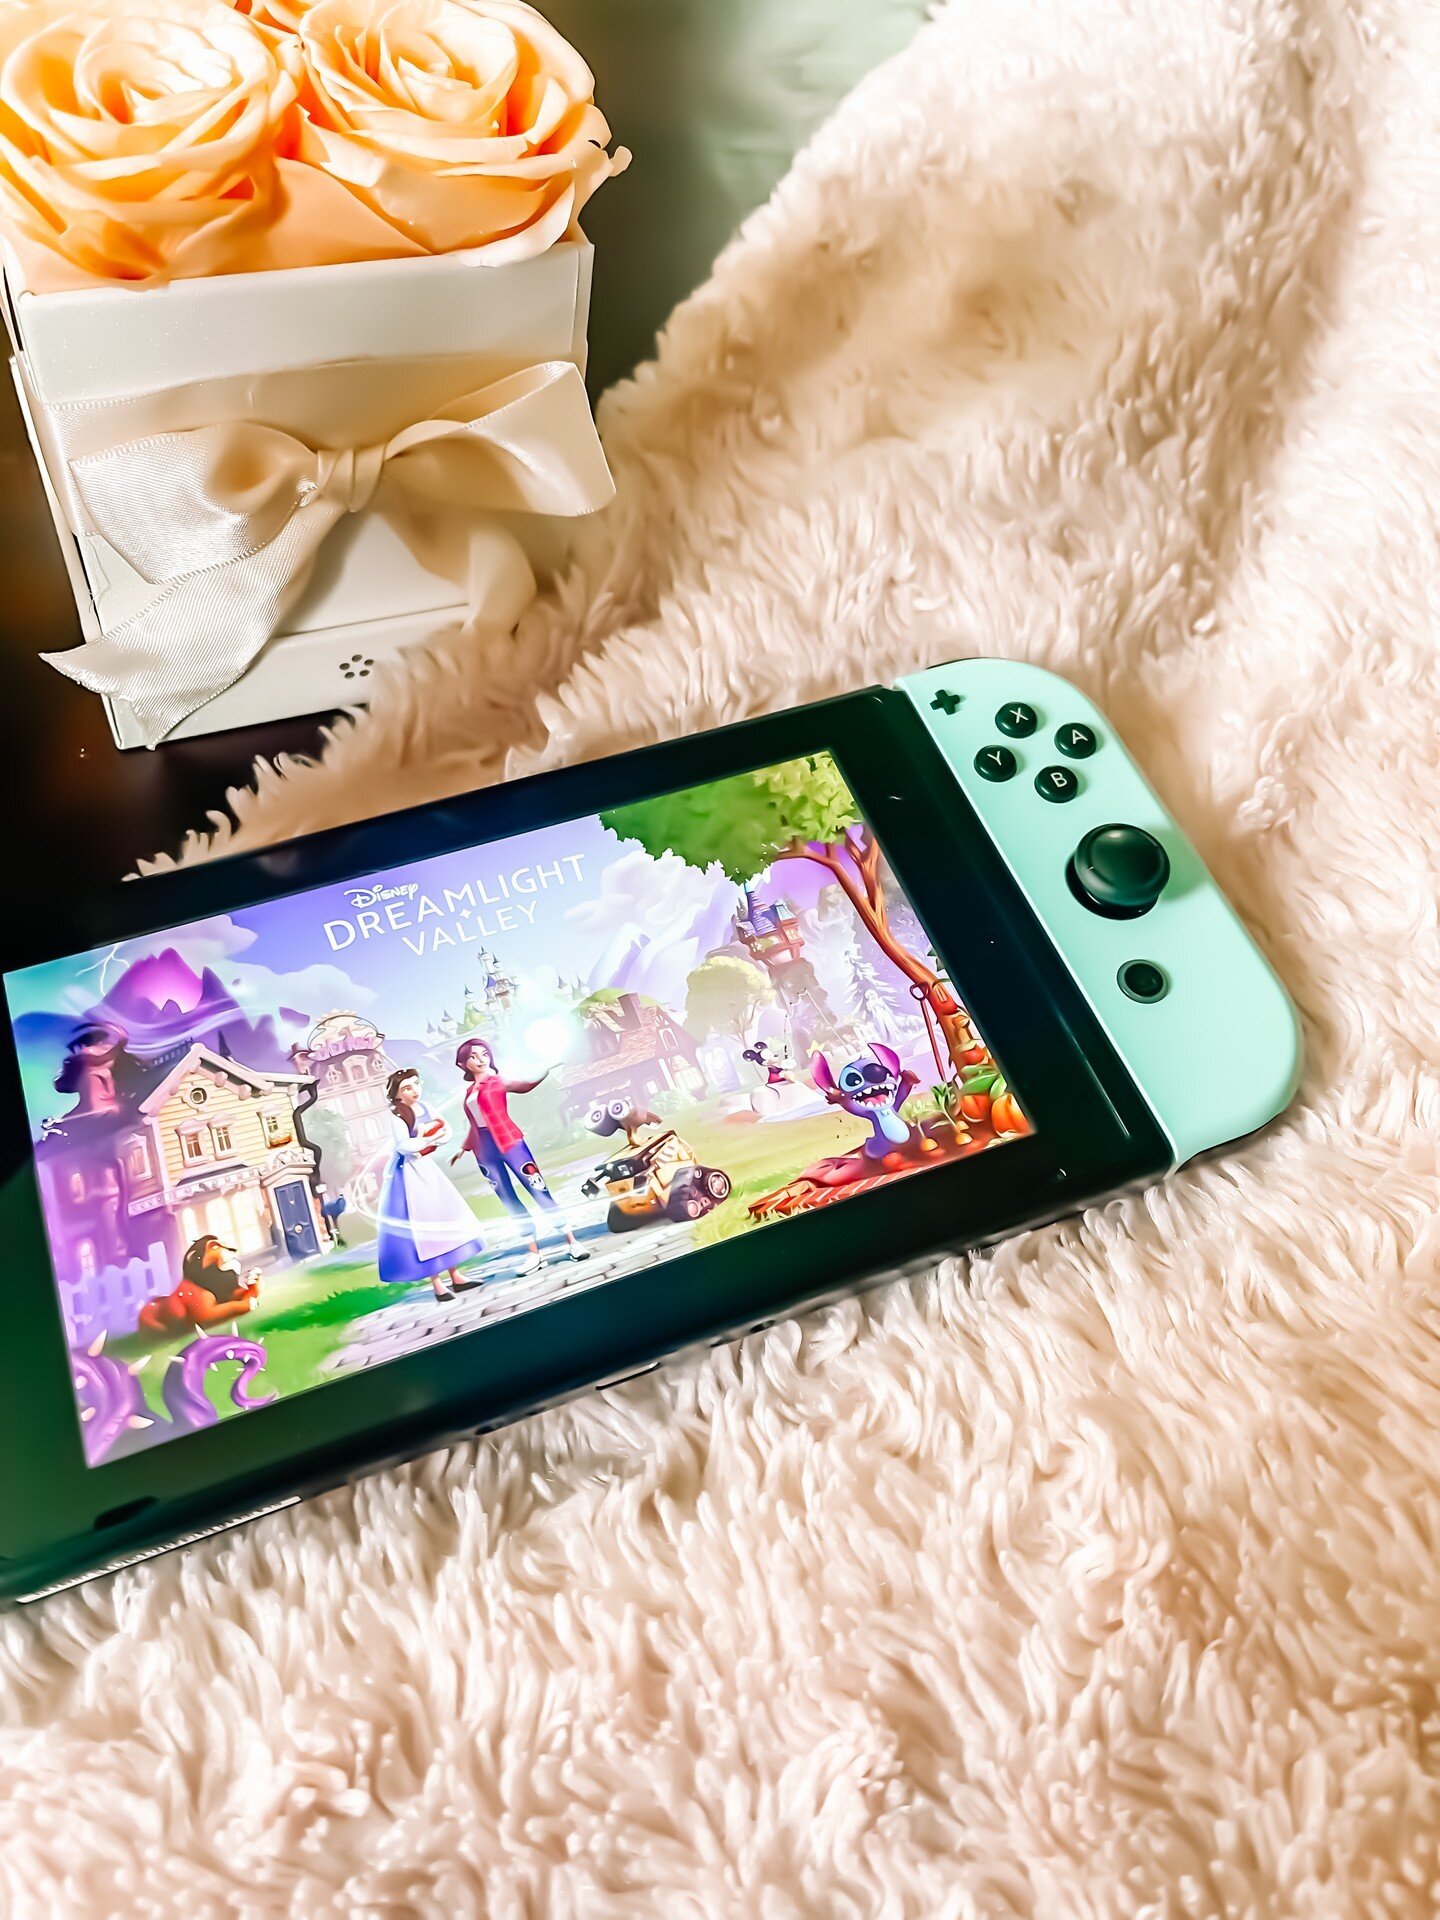 💖✨ Okay, I did it. I bought Dreamlight Valley for our Nintendo Switch. 💖✨

After reading about the game and hearing all these rave reviews online, I decided to get it. Then I promptly stopped myself. I AM AN ADULT. I have priorities and things I ne